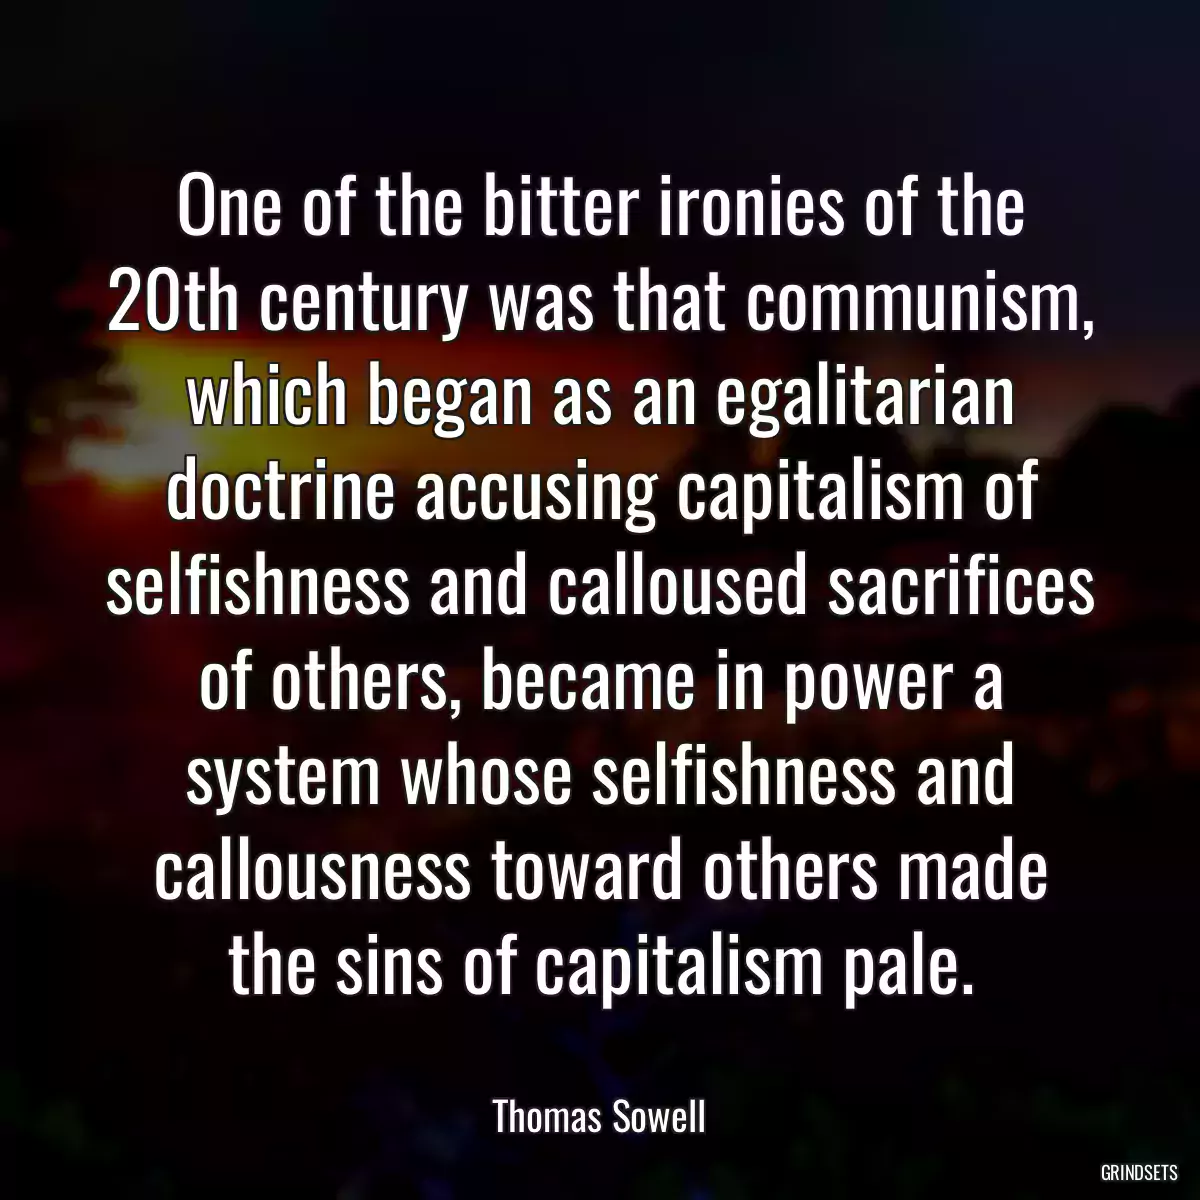 One of the bitter ironies of the 20th century was that communism, which began as an egalitarian doctrine accusing capitalism of selfishness and calloused sacrifices of others, became in power a system whose selfishness and callousness toward others made the sins of capitalism pale.